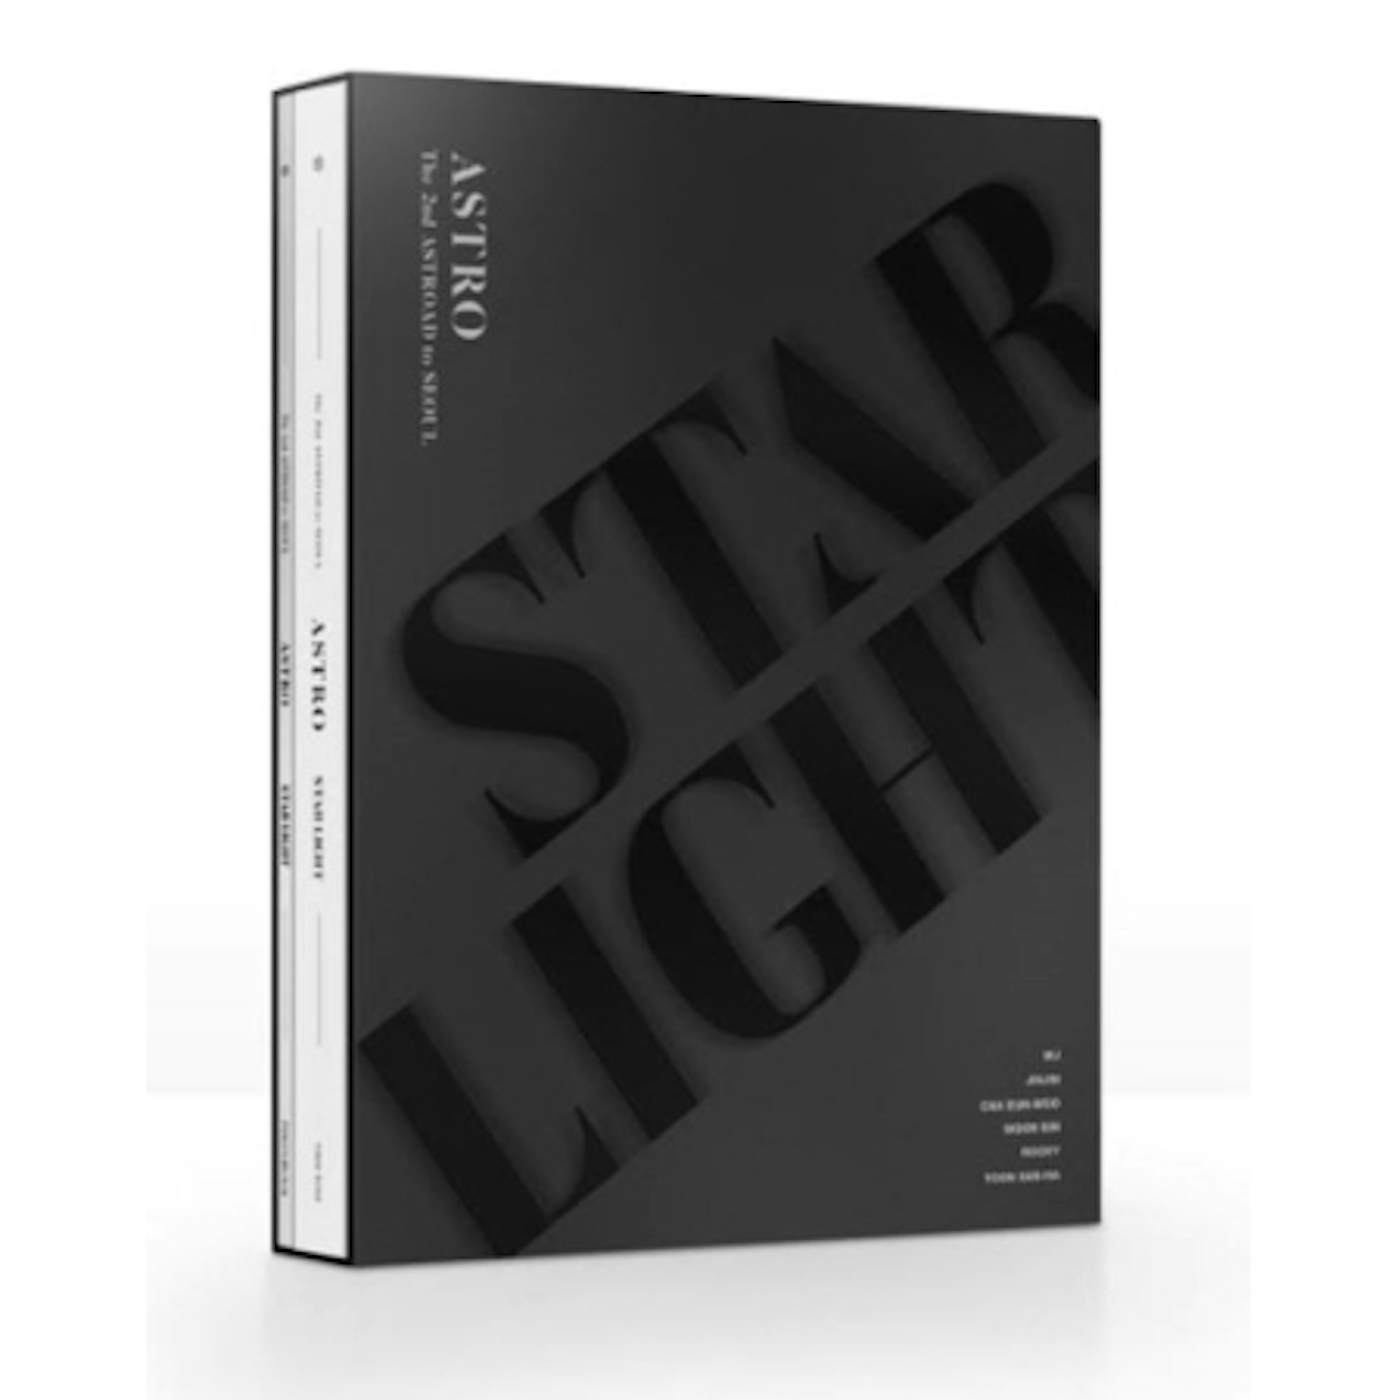 ASTRO THE 2ND ASTRO TO SEOUL (STAR LIGHT) Blu-ray